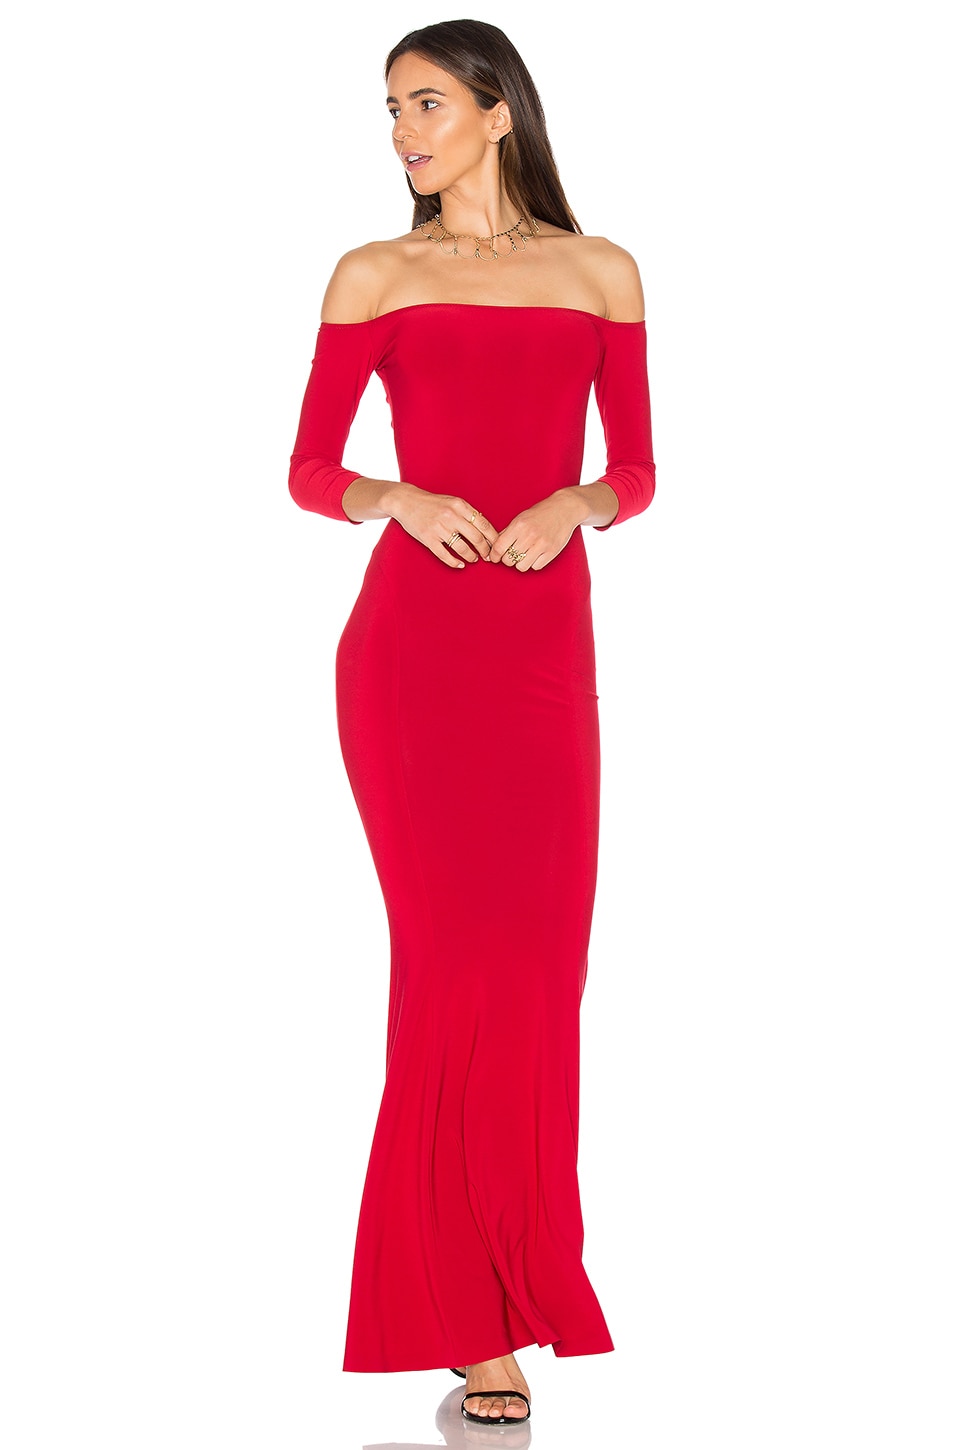 2 Stores In Stock: NORMA KAMALI Off The Shoulder Fishtail Gown, Red ...